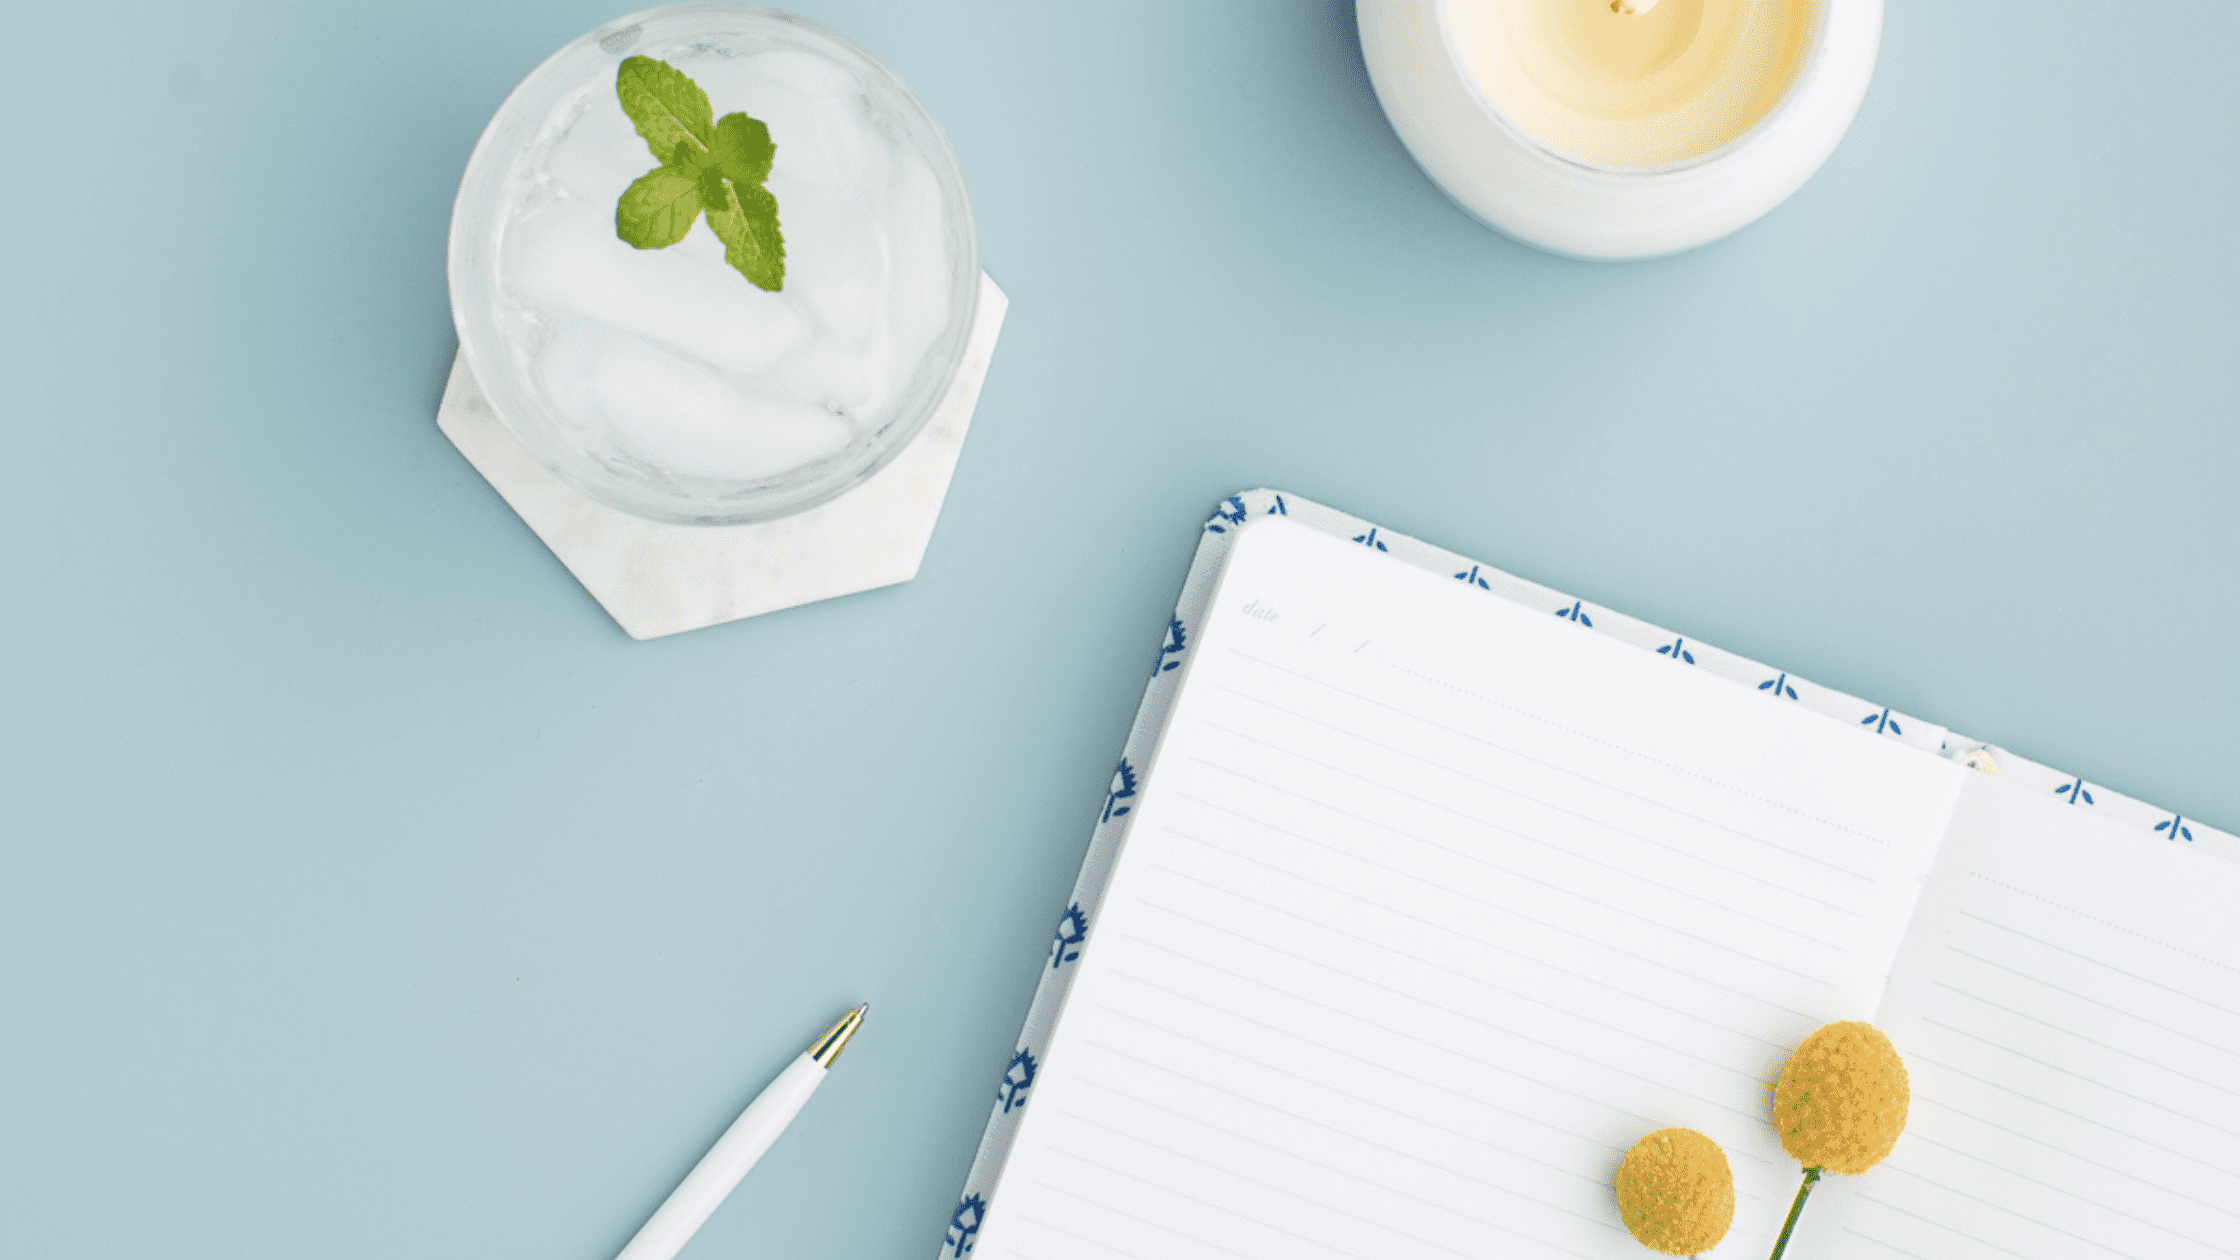 Tips for making journaling a habit